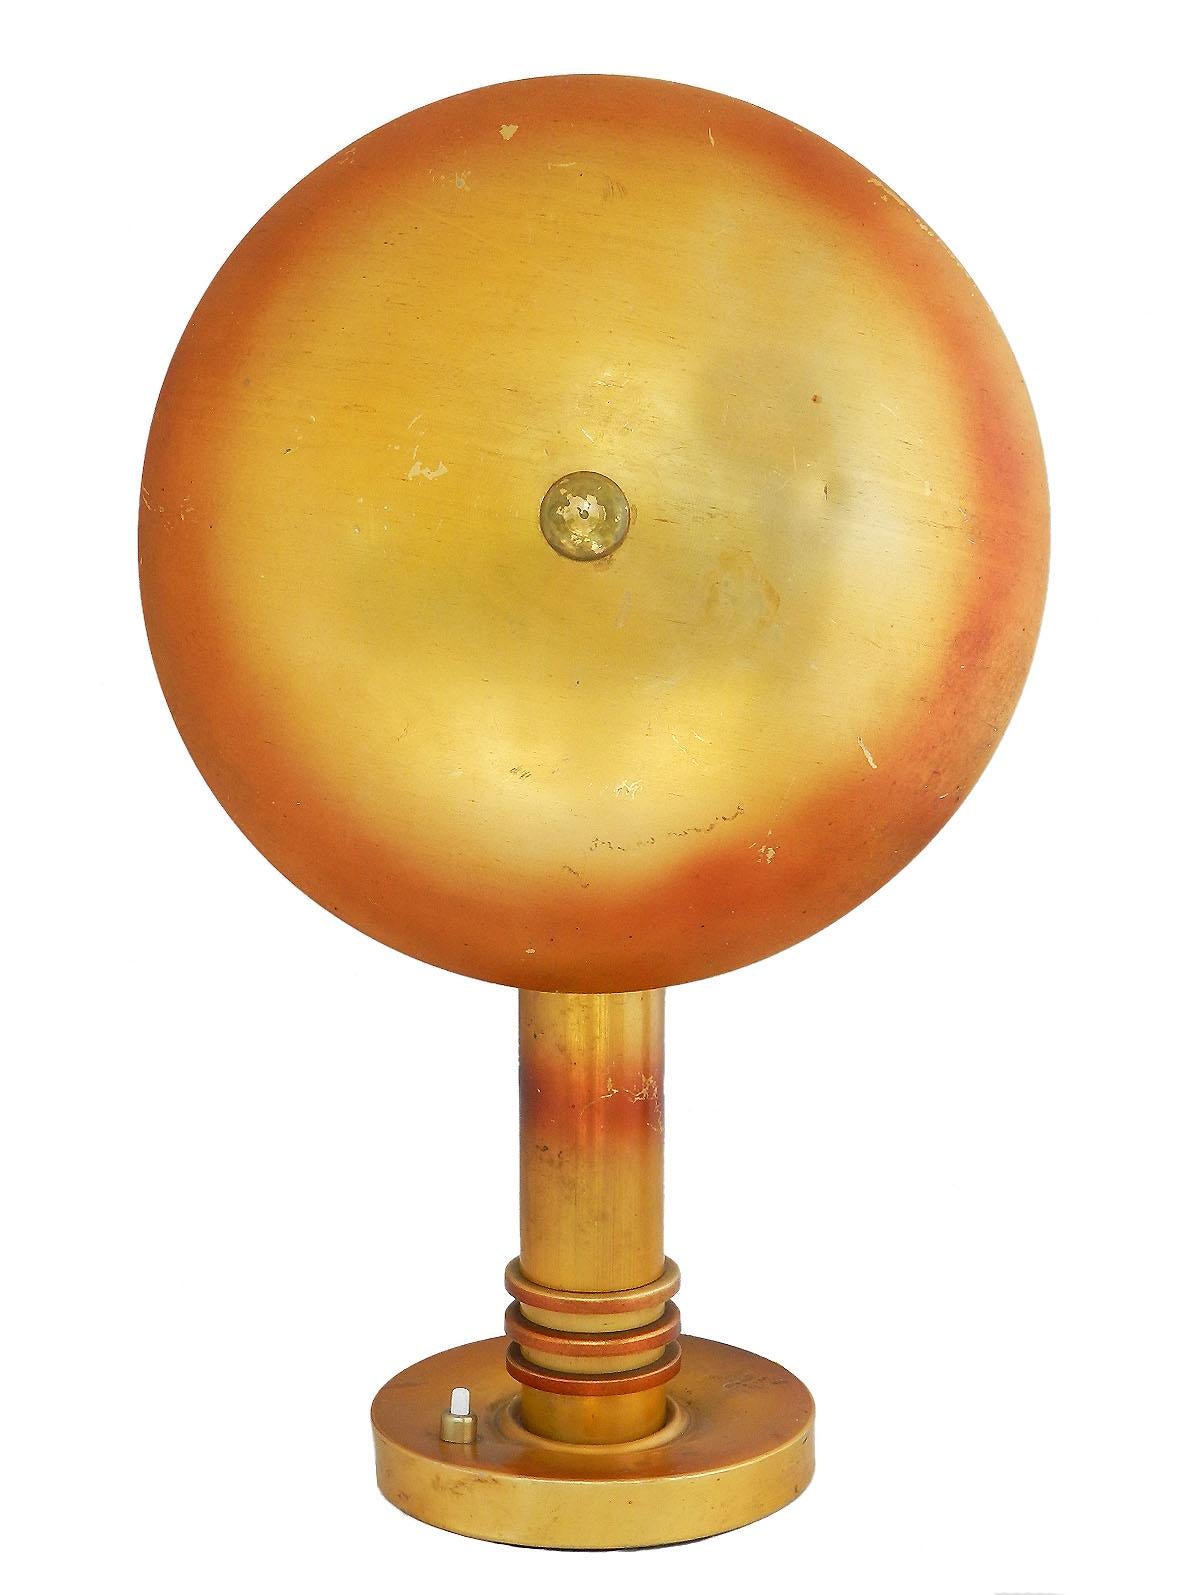 Art Deco vintage French aluminum table lamp
Unusual rare find
The adjustable flying saucer shade above a cylindrical column on a circular base
The colored finish is distressed through use and age
Use as is or restore to suit
Easily rewired for